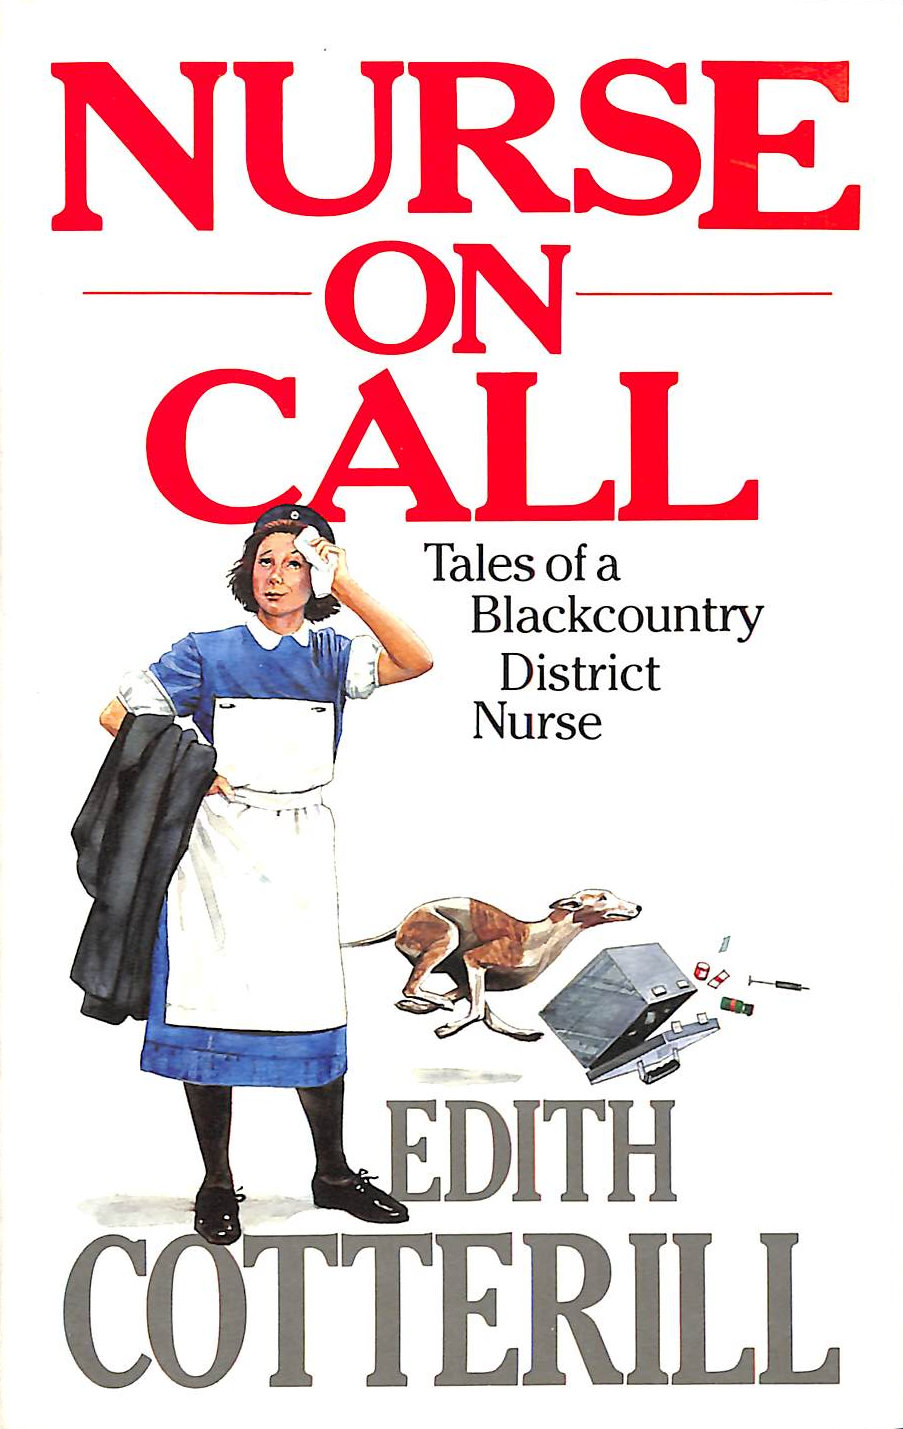 COTTERILL, EDITH - Nurse on Call: Tales of a Black Country District Nurse